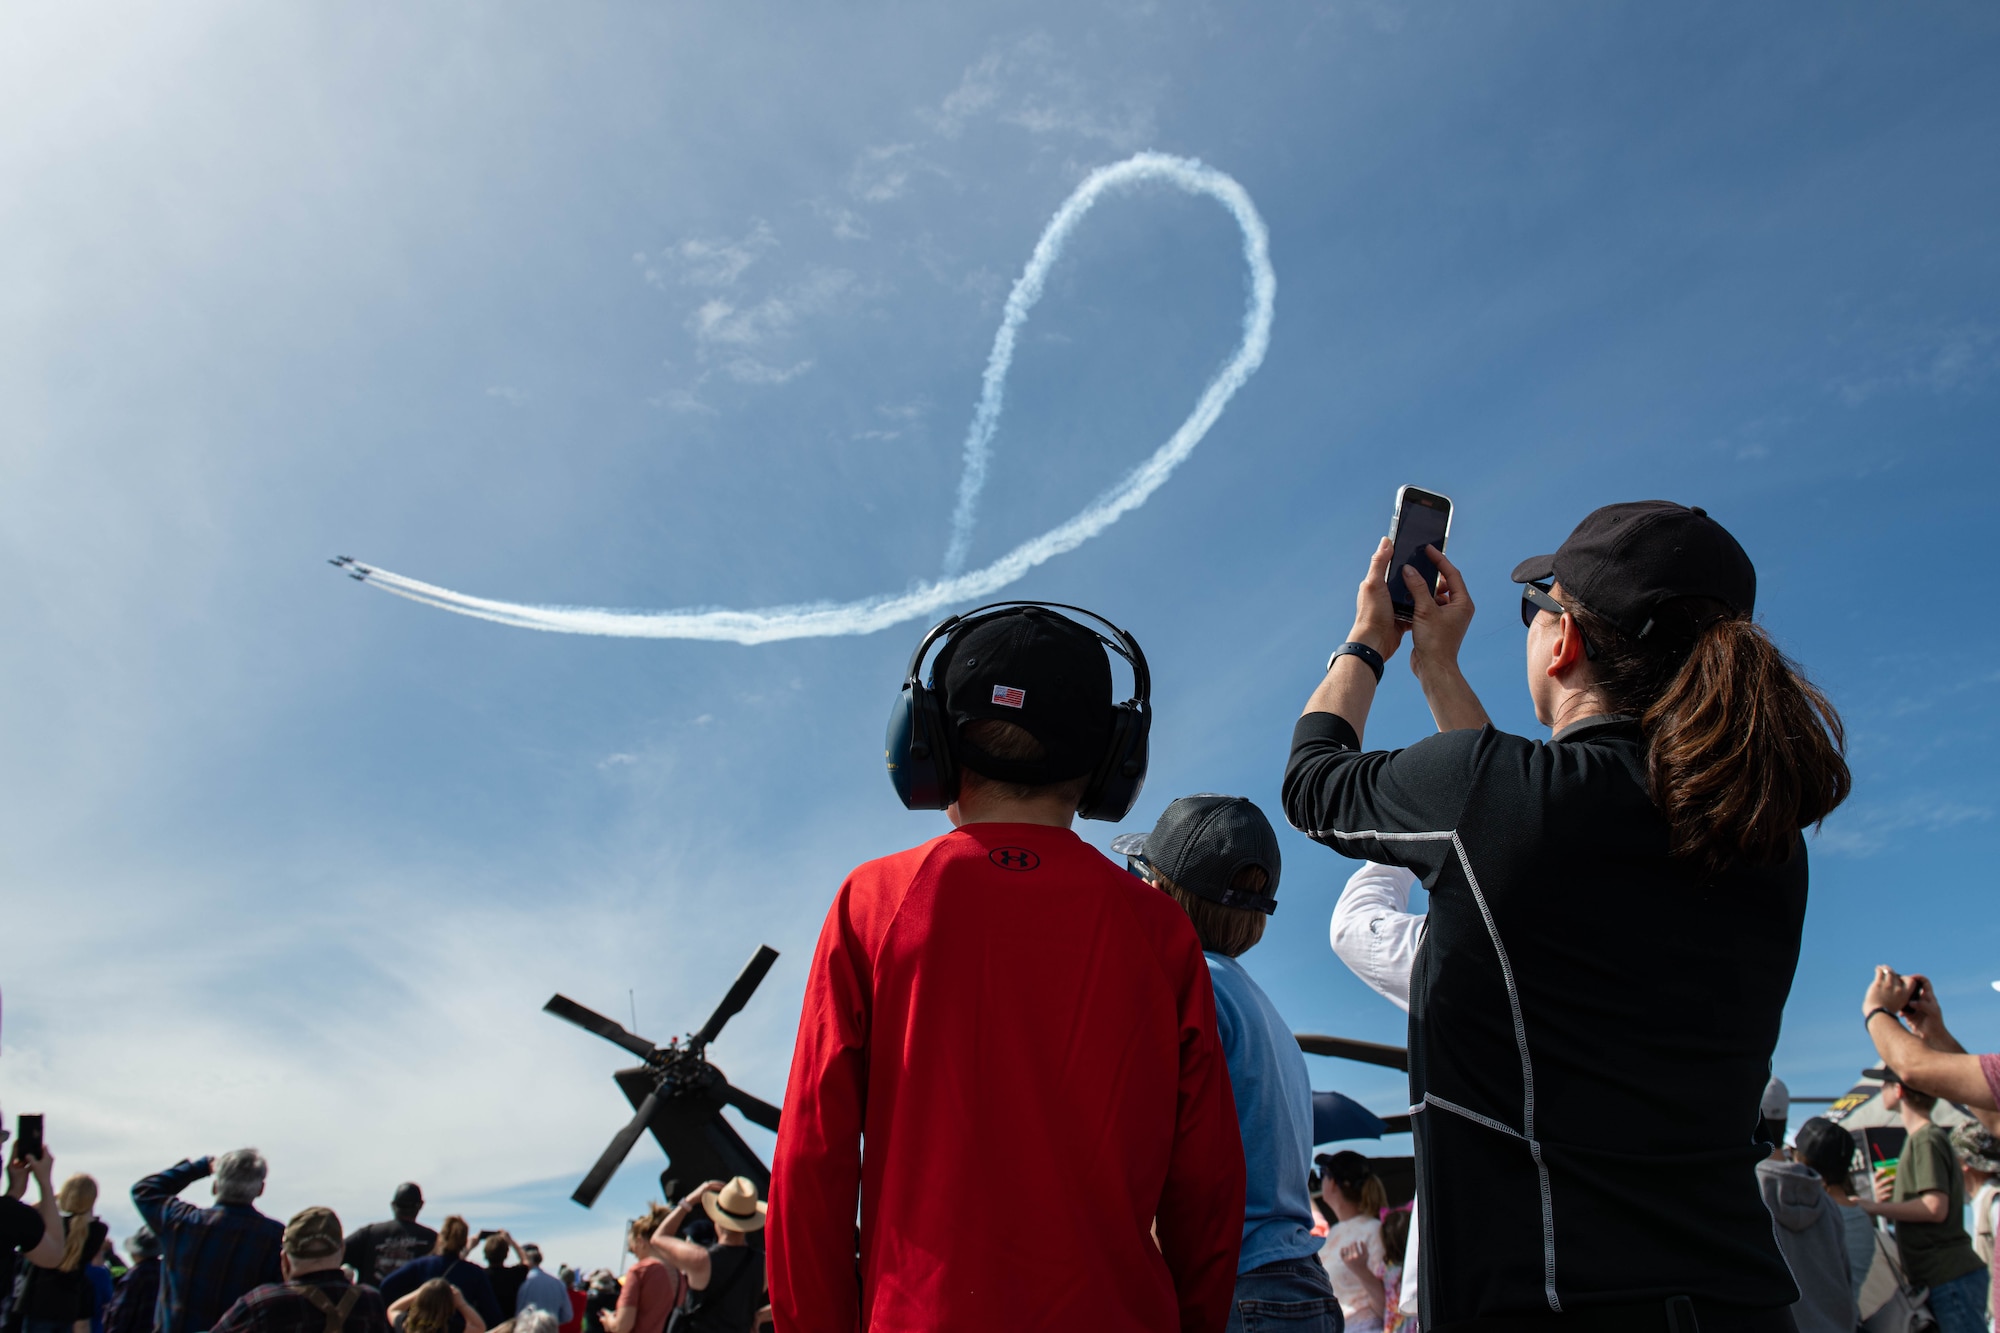 Audience members observe the U.S. Navy Flight Demonstration Squadron, the Blue Angels, perform during the 2022 Ellsworth Air and Space Show at Ellsworth Air Force Base, S.D., May 14, 2022. During airshows the Blue Angels often perform a Diamond 360 maneuver, where the jets fly only 18 inches apart. (U.S. Air Force photo by Senior Airman Quentin Marx)